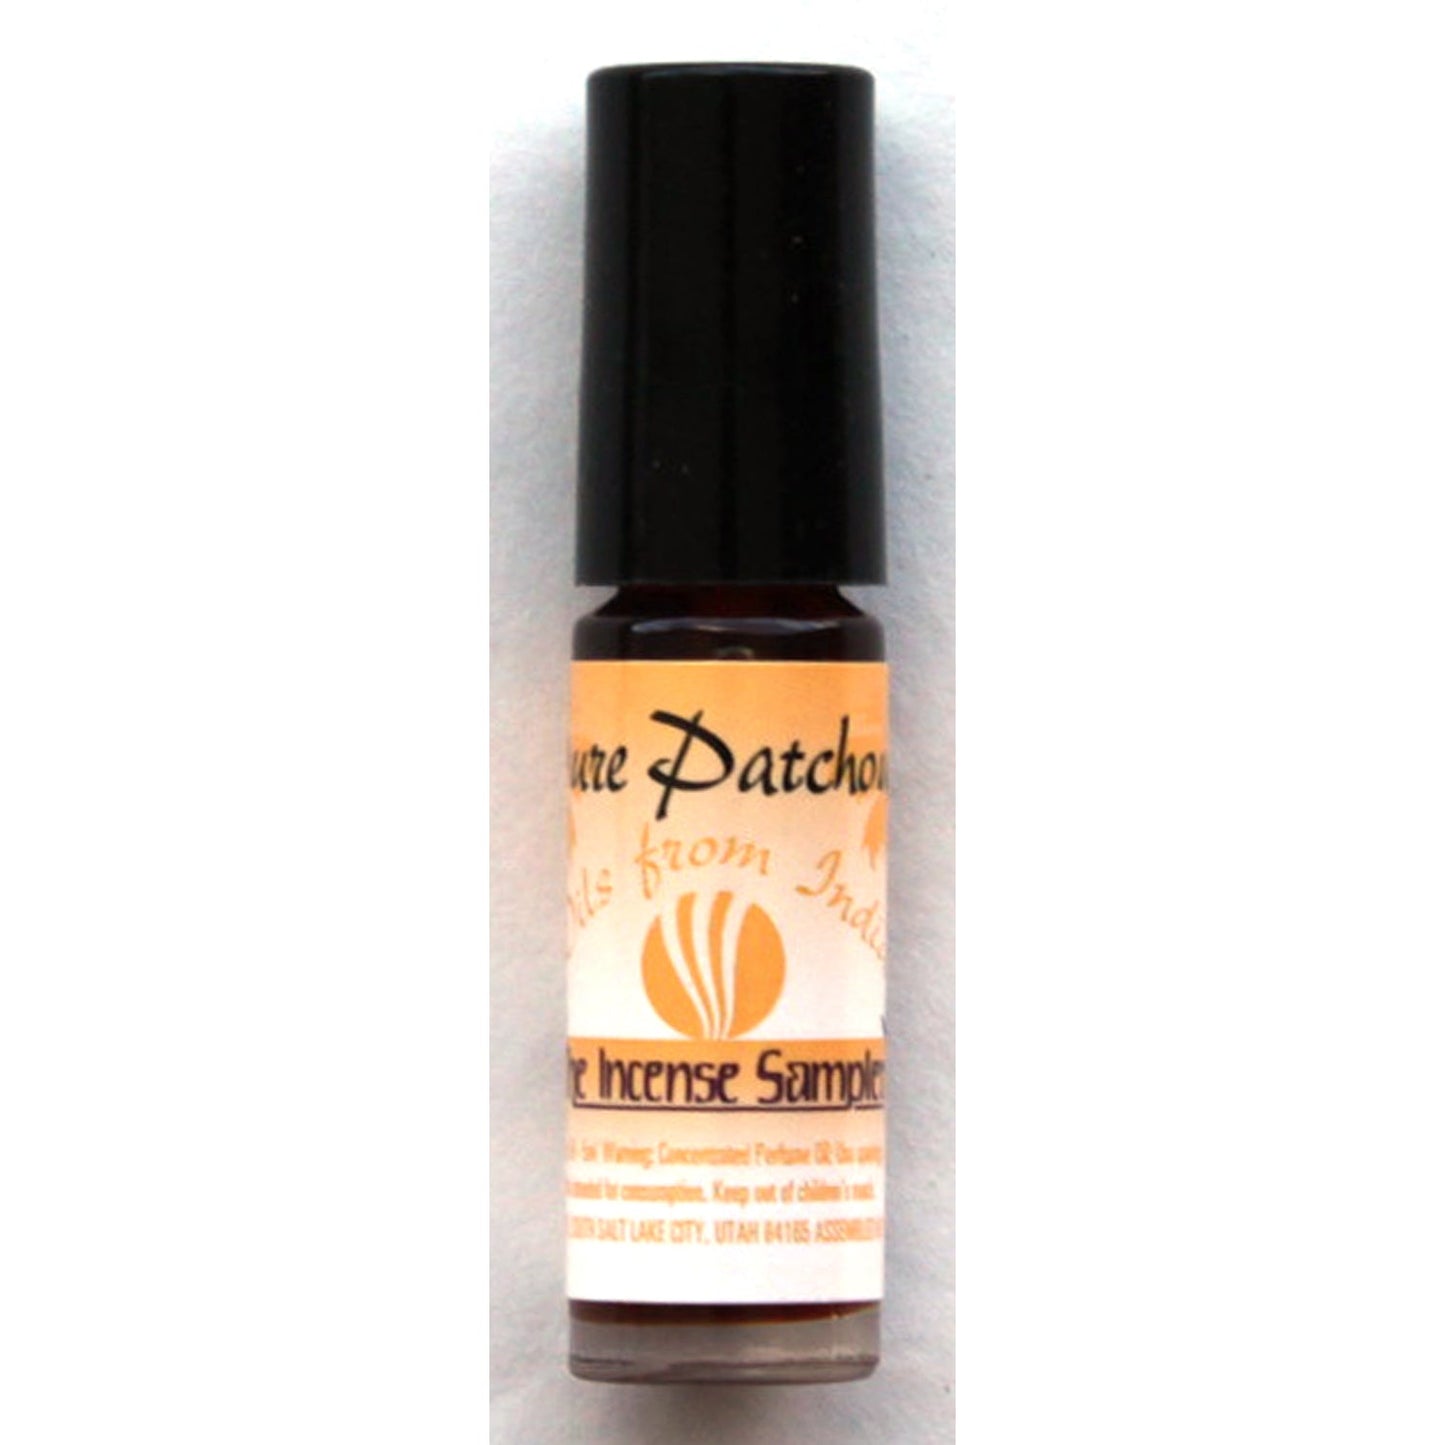 Oils From India - Pure Patchouli